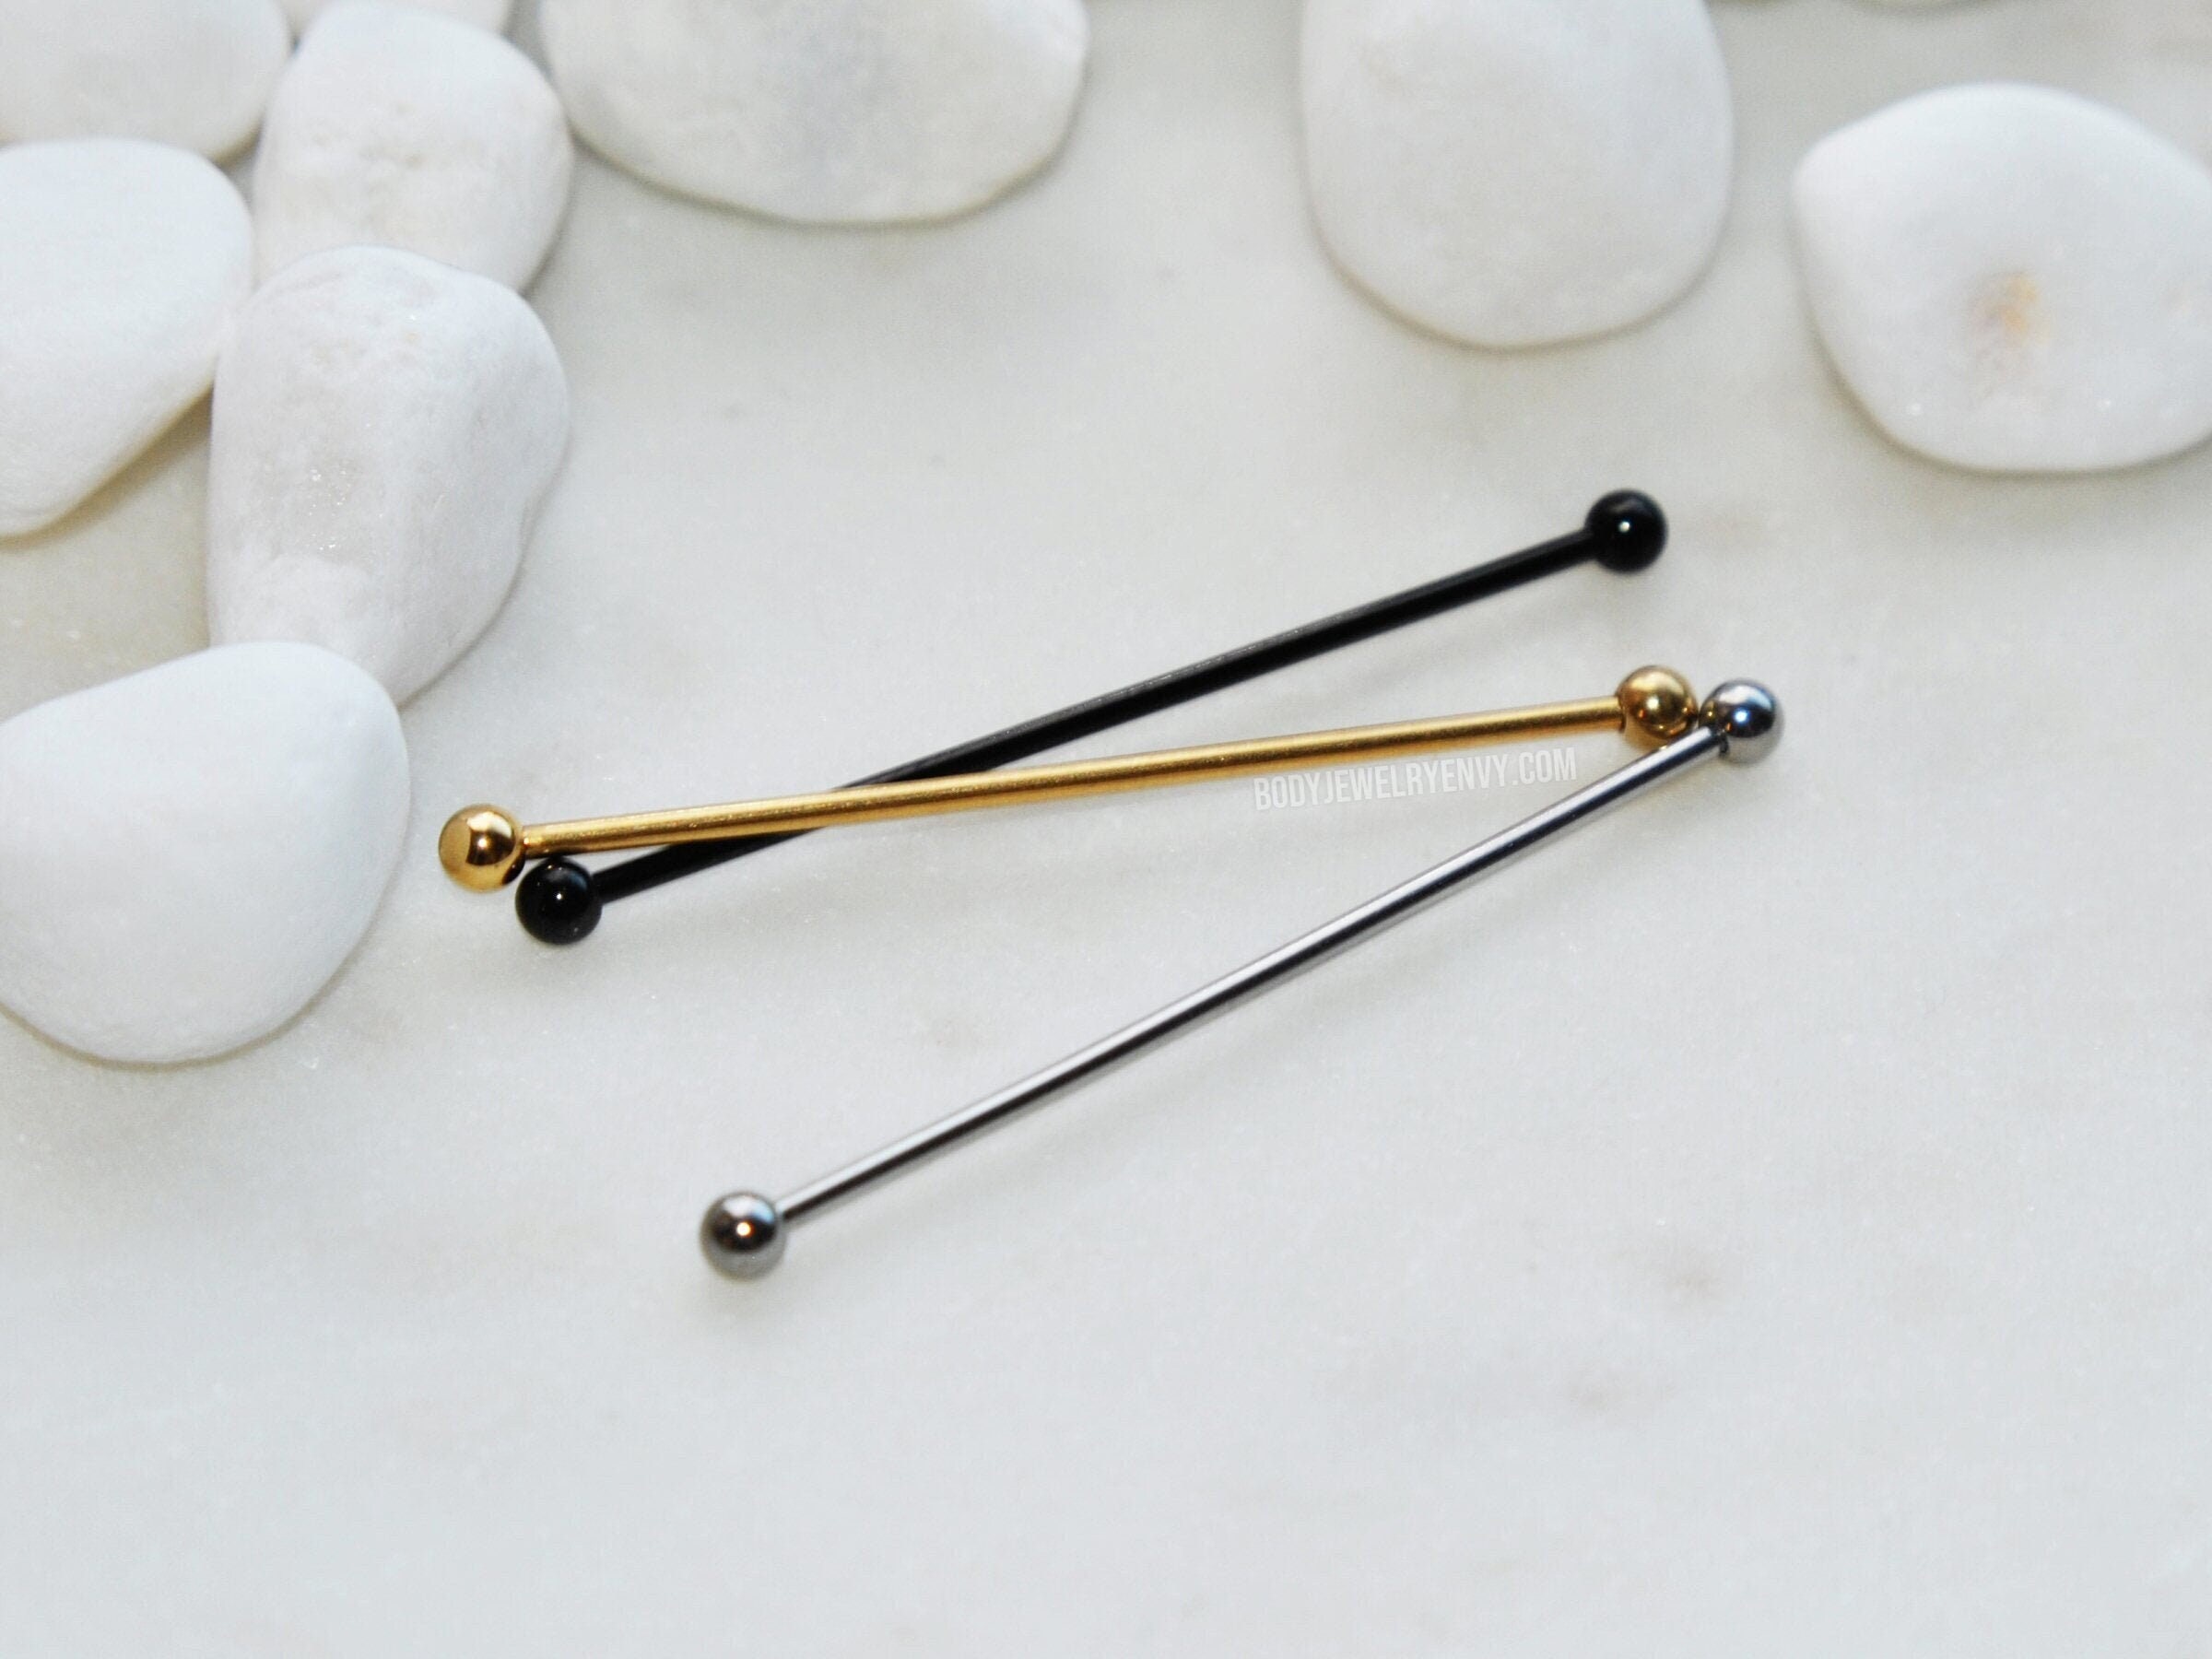 Disposable threaded taper for 16g - Piercing Experience